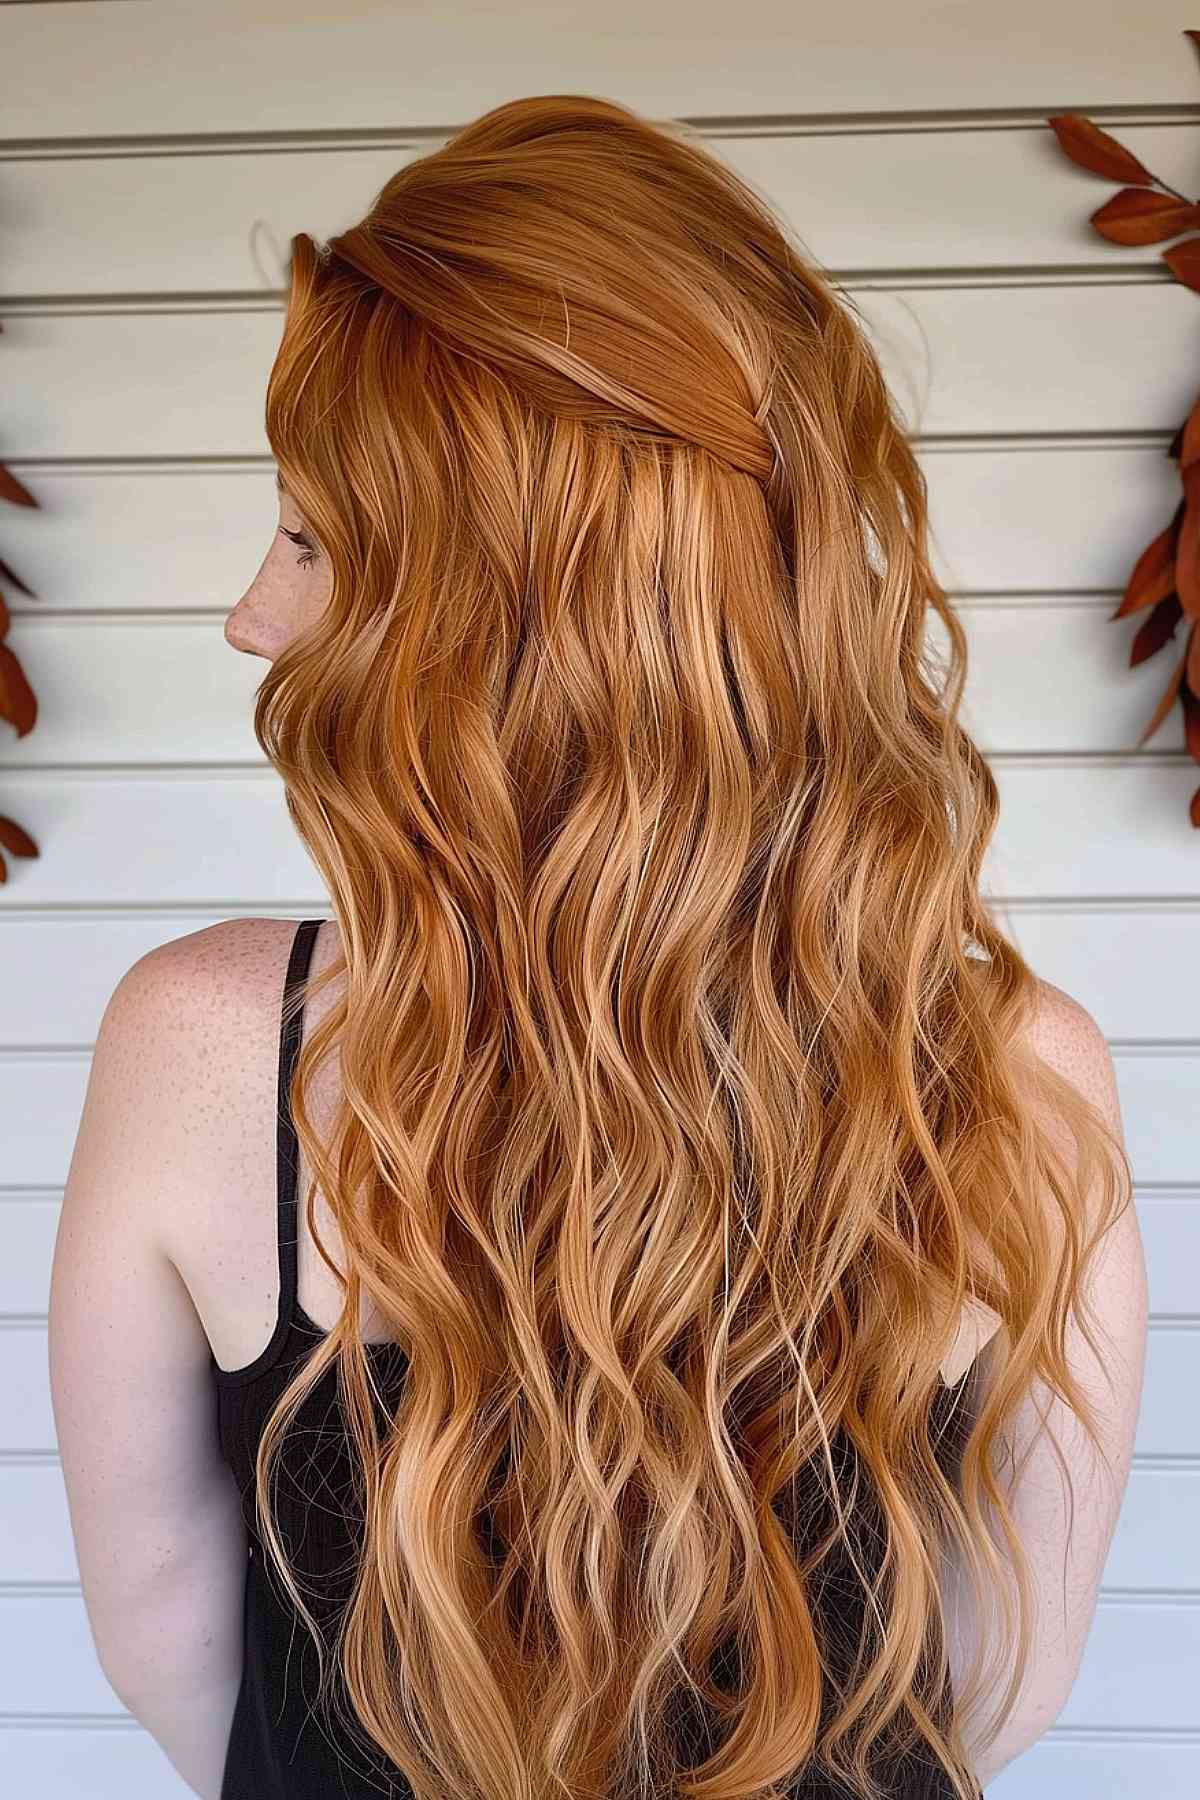 Long waves with a sun-kissed ginger copper hue